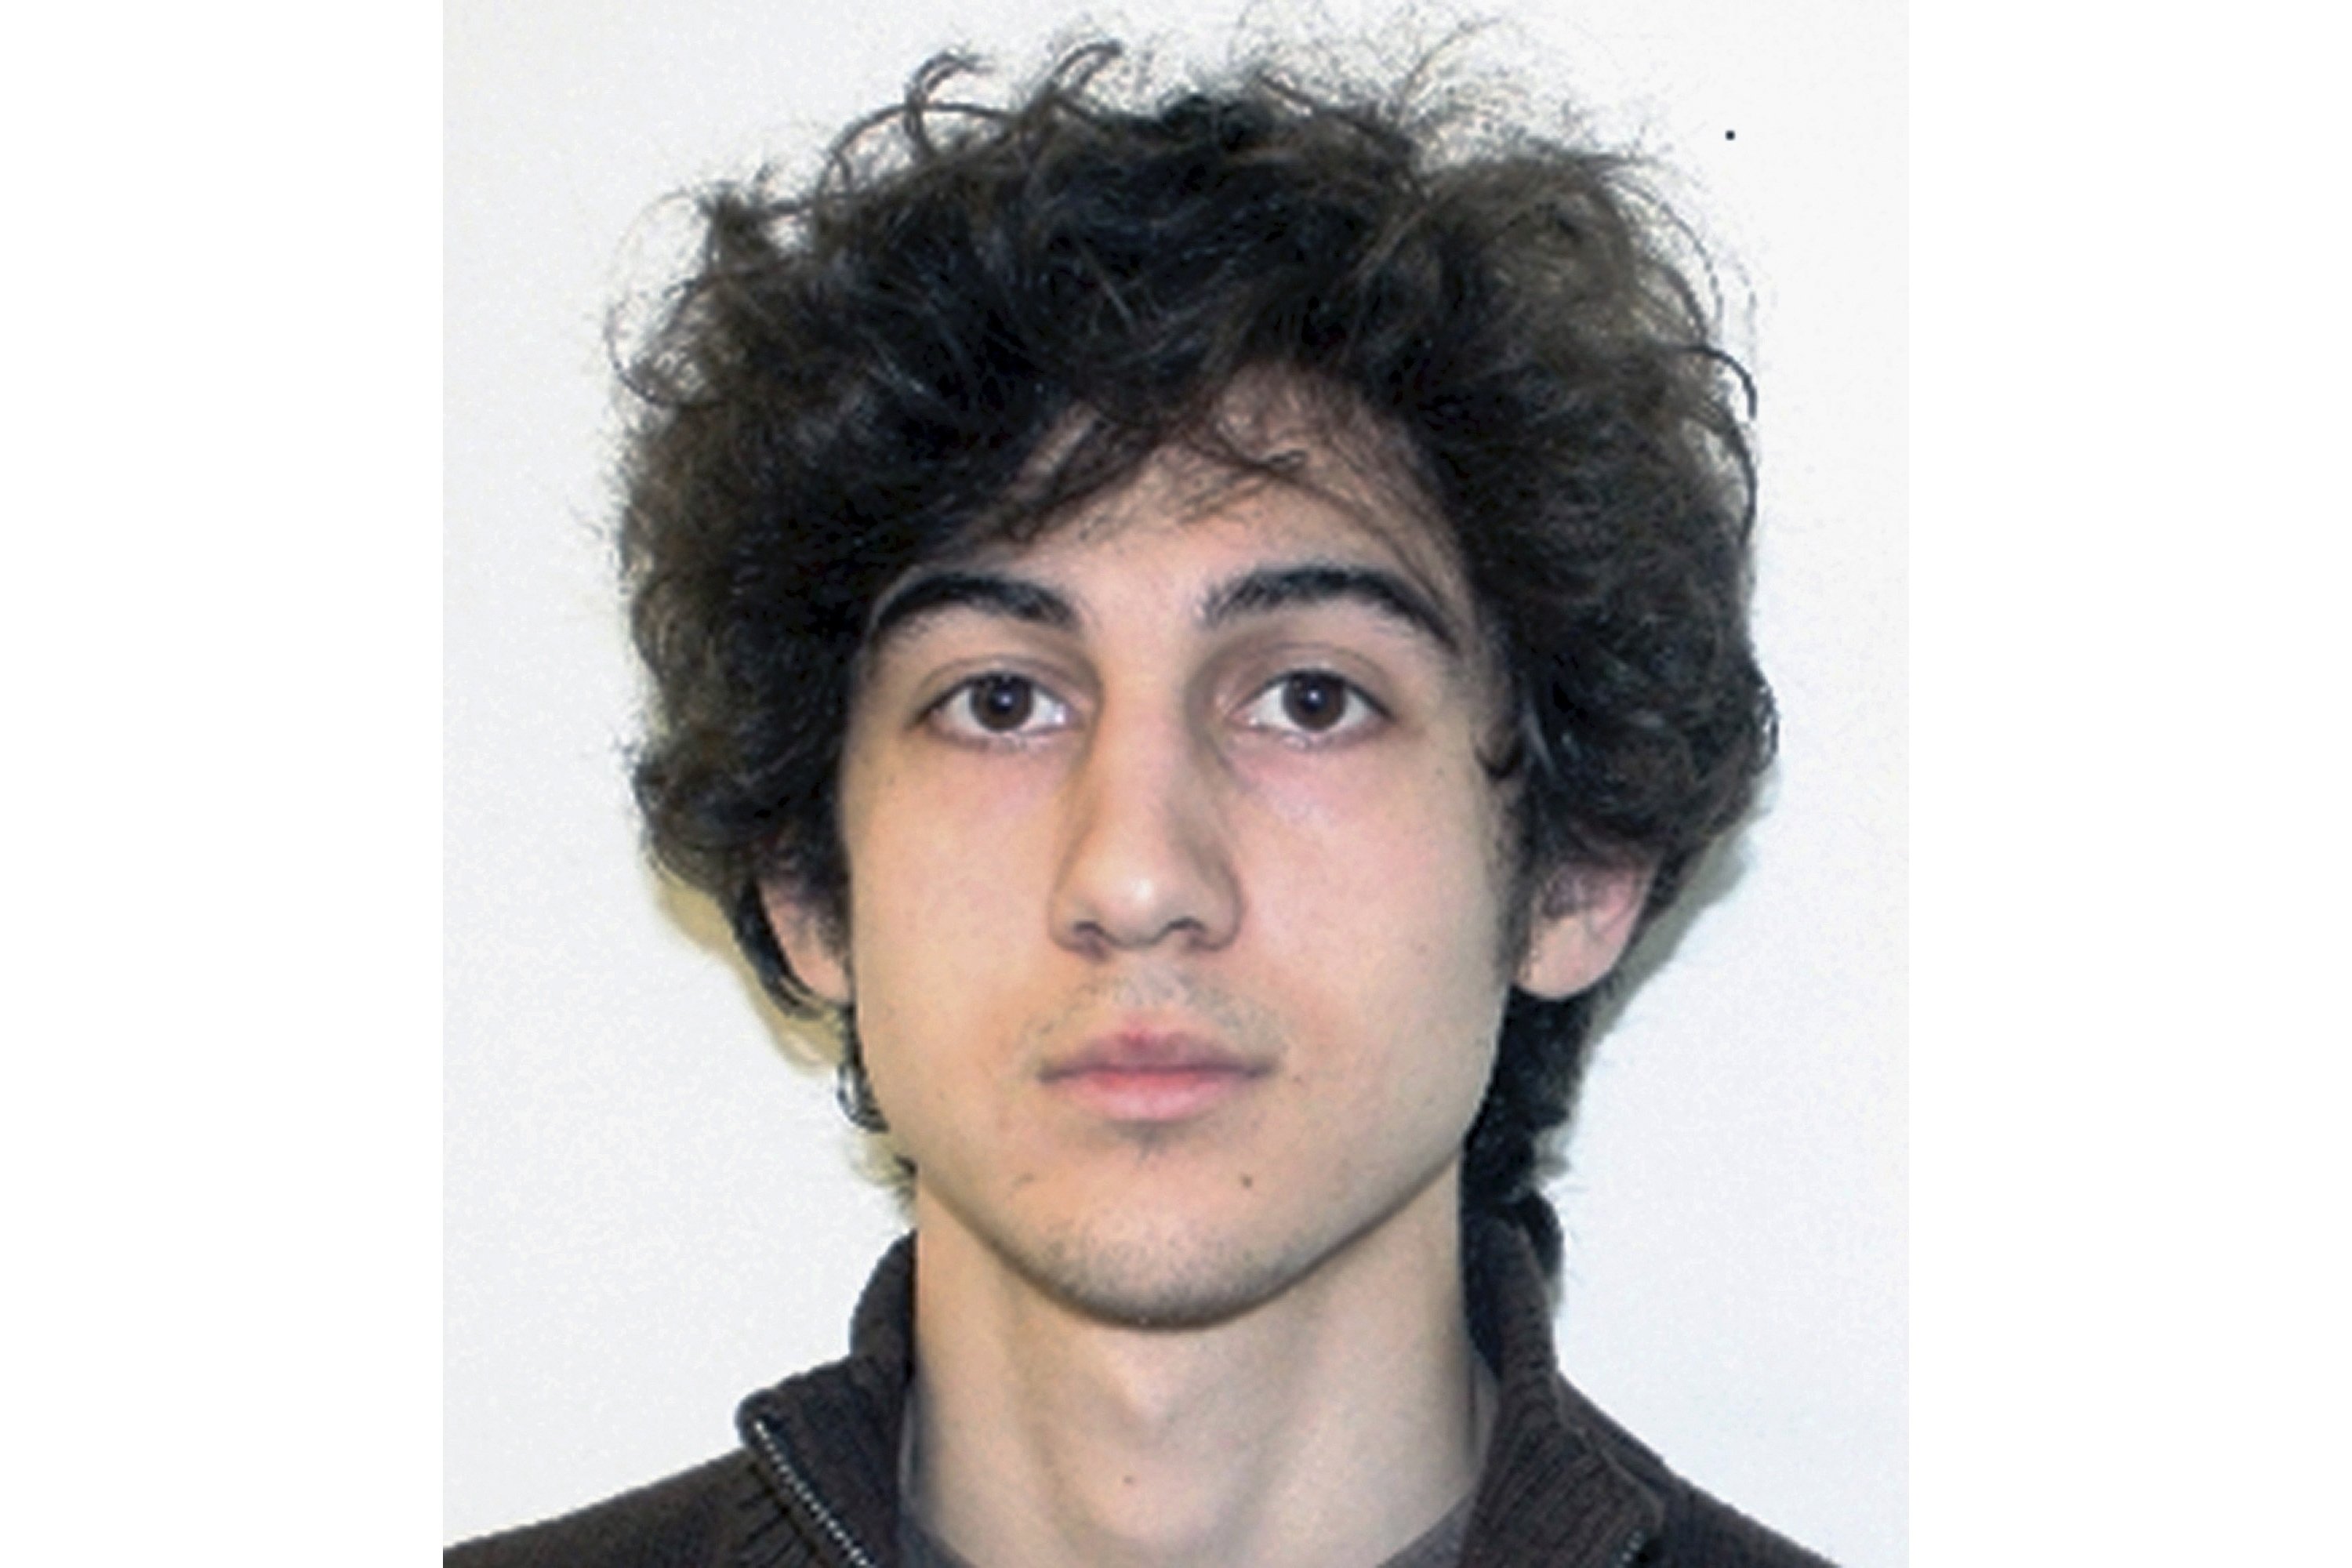 Court could reimpose the death sentence of the Boston Marathon suicide bomber